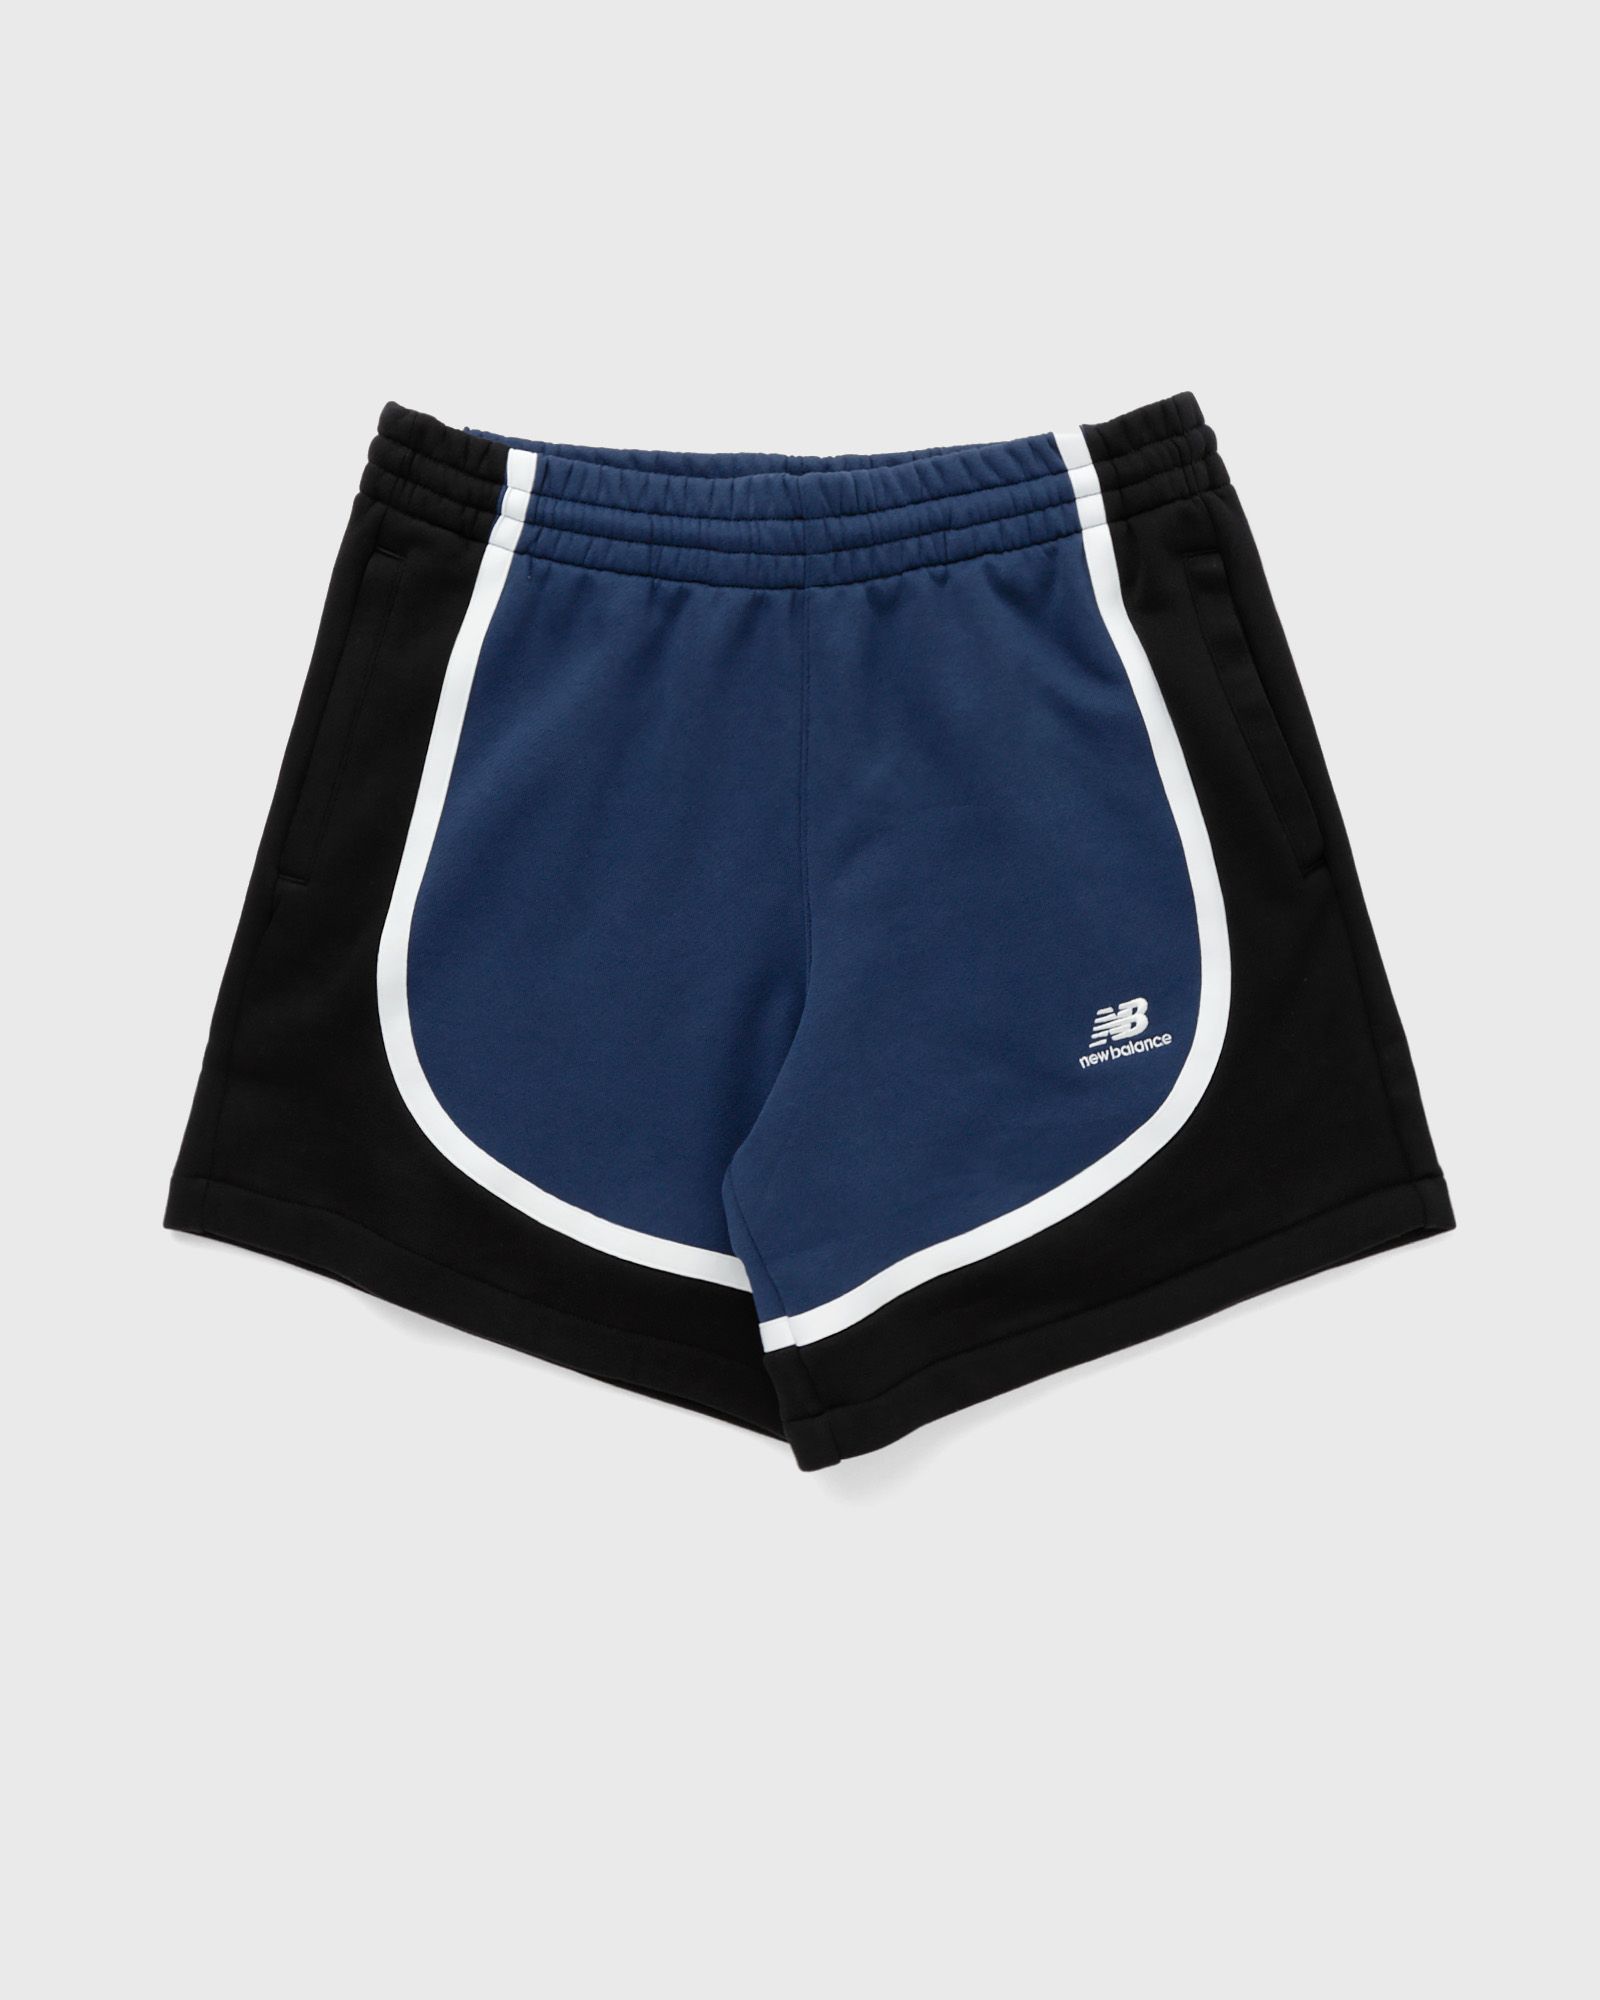 New Balance Archive Stretch Woven Short » Buy online now!